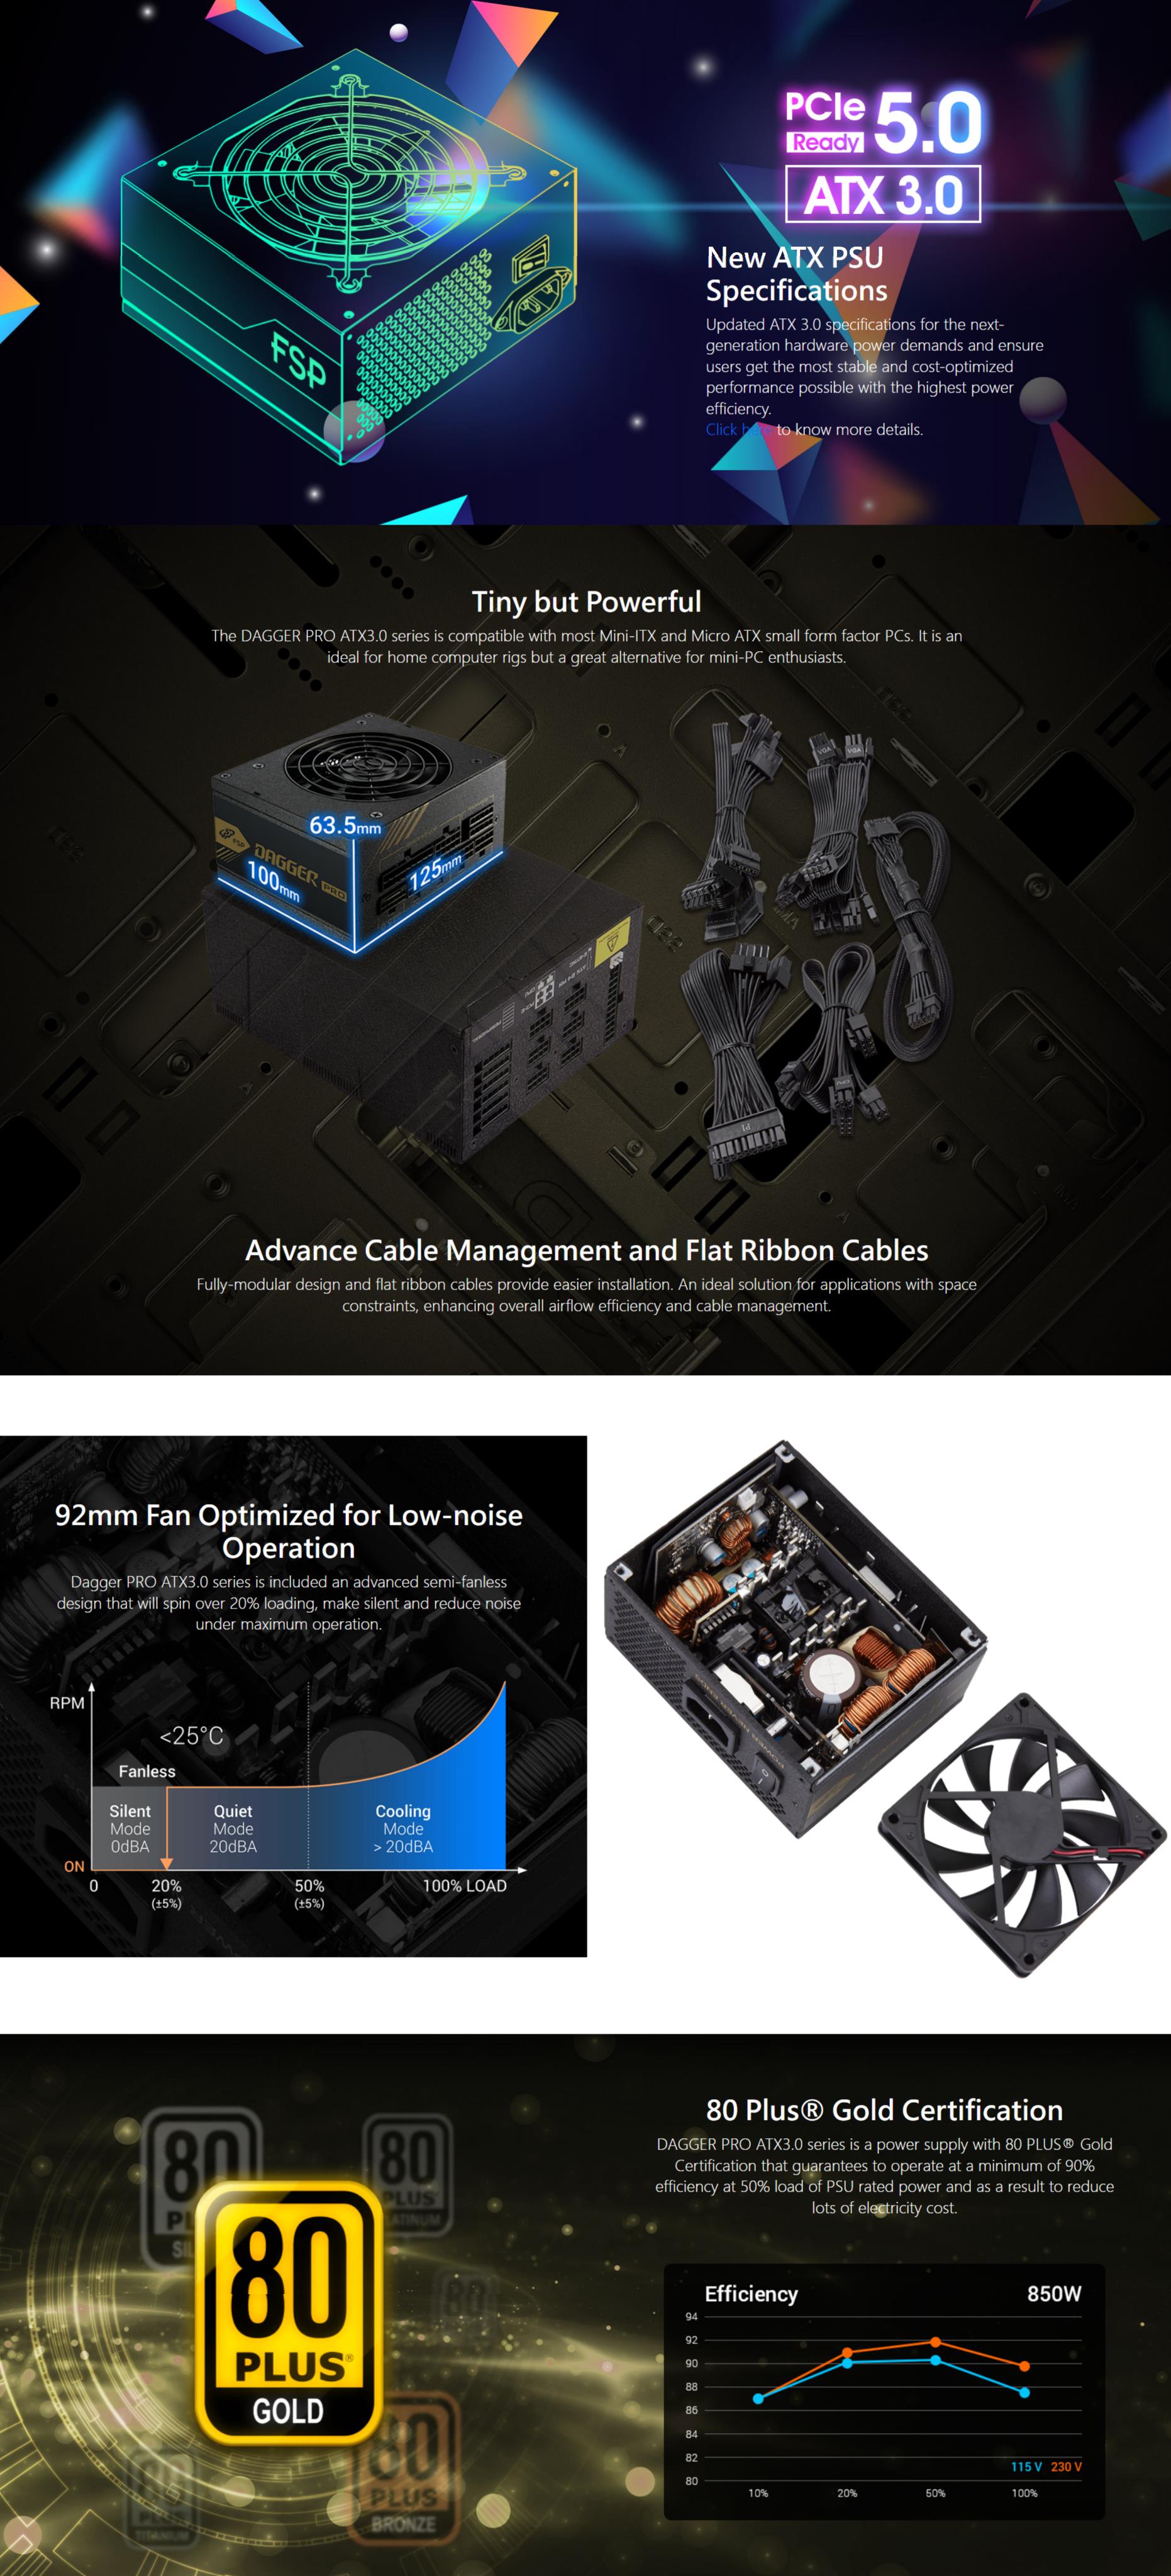 A large marketing image providing additional information about the product FSP Dagger PRO 850W Gold PCIe 5.0 SFX Modular PSU - Black - Additional alt info not provided